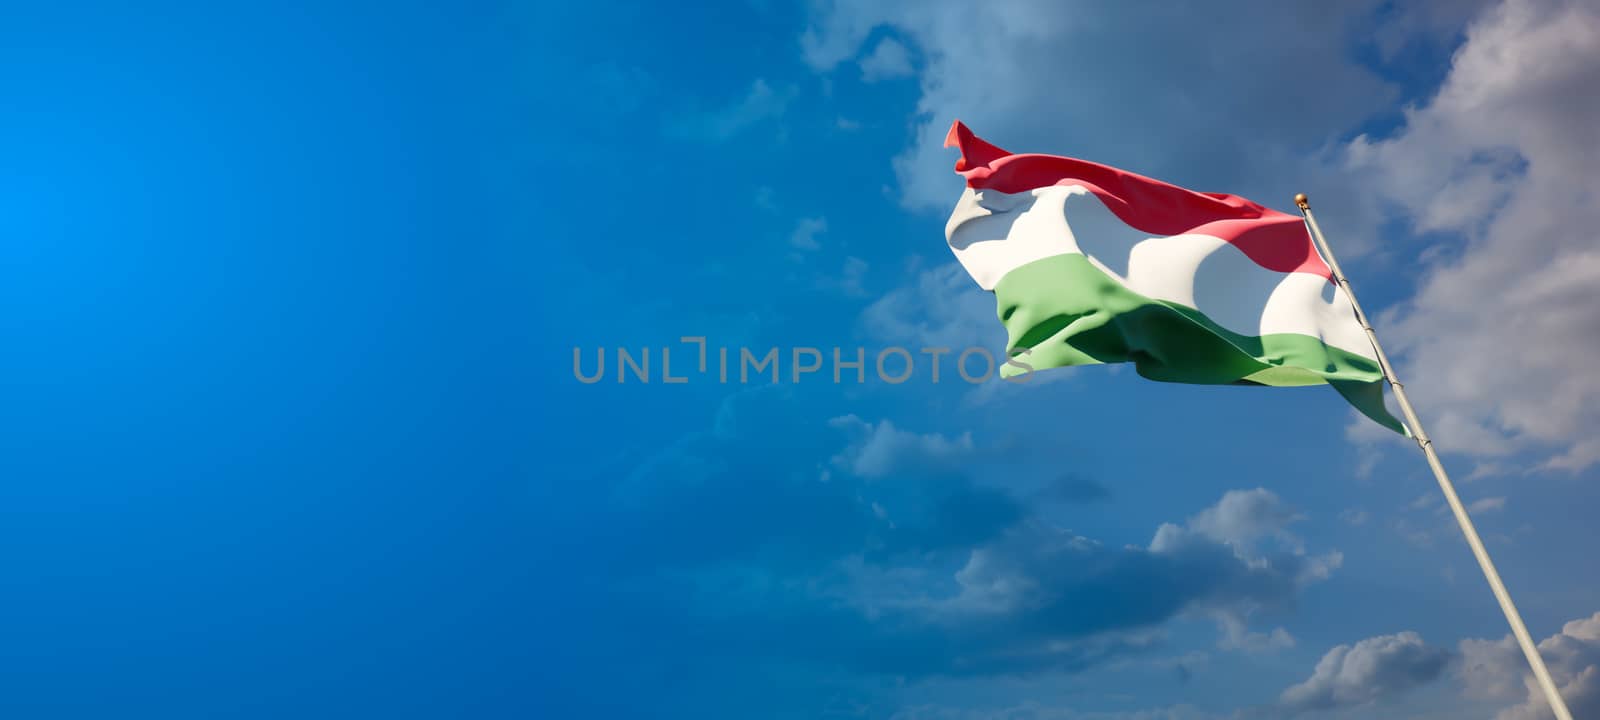 Hungary national flag with blank text space on wide background. by altman